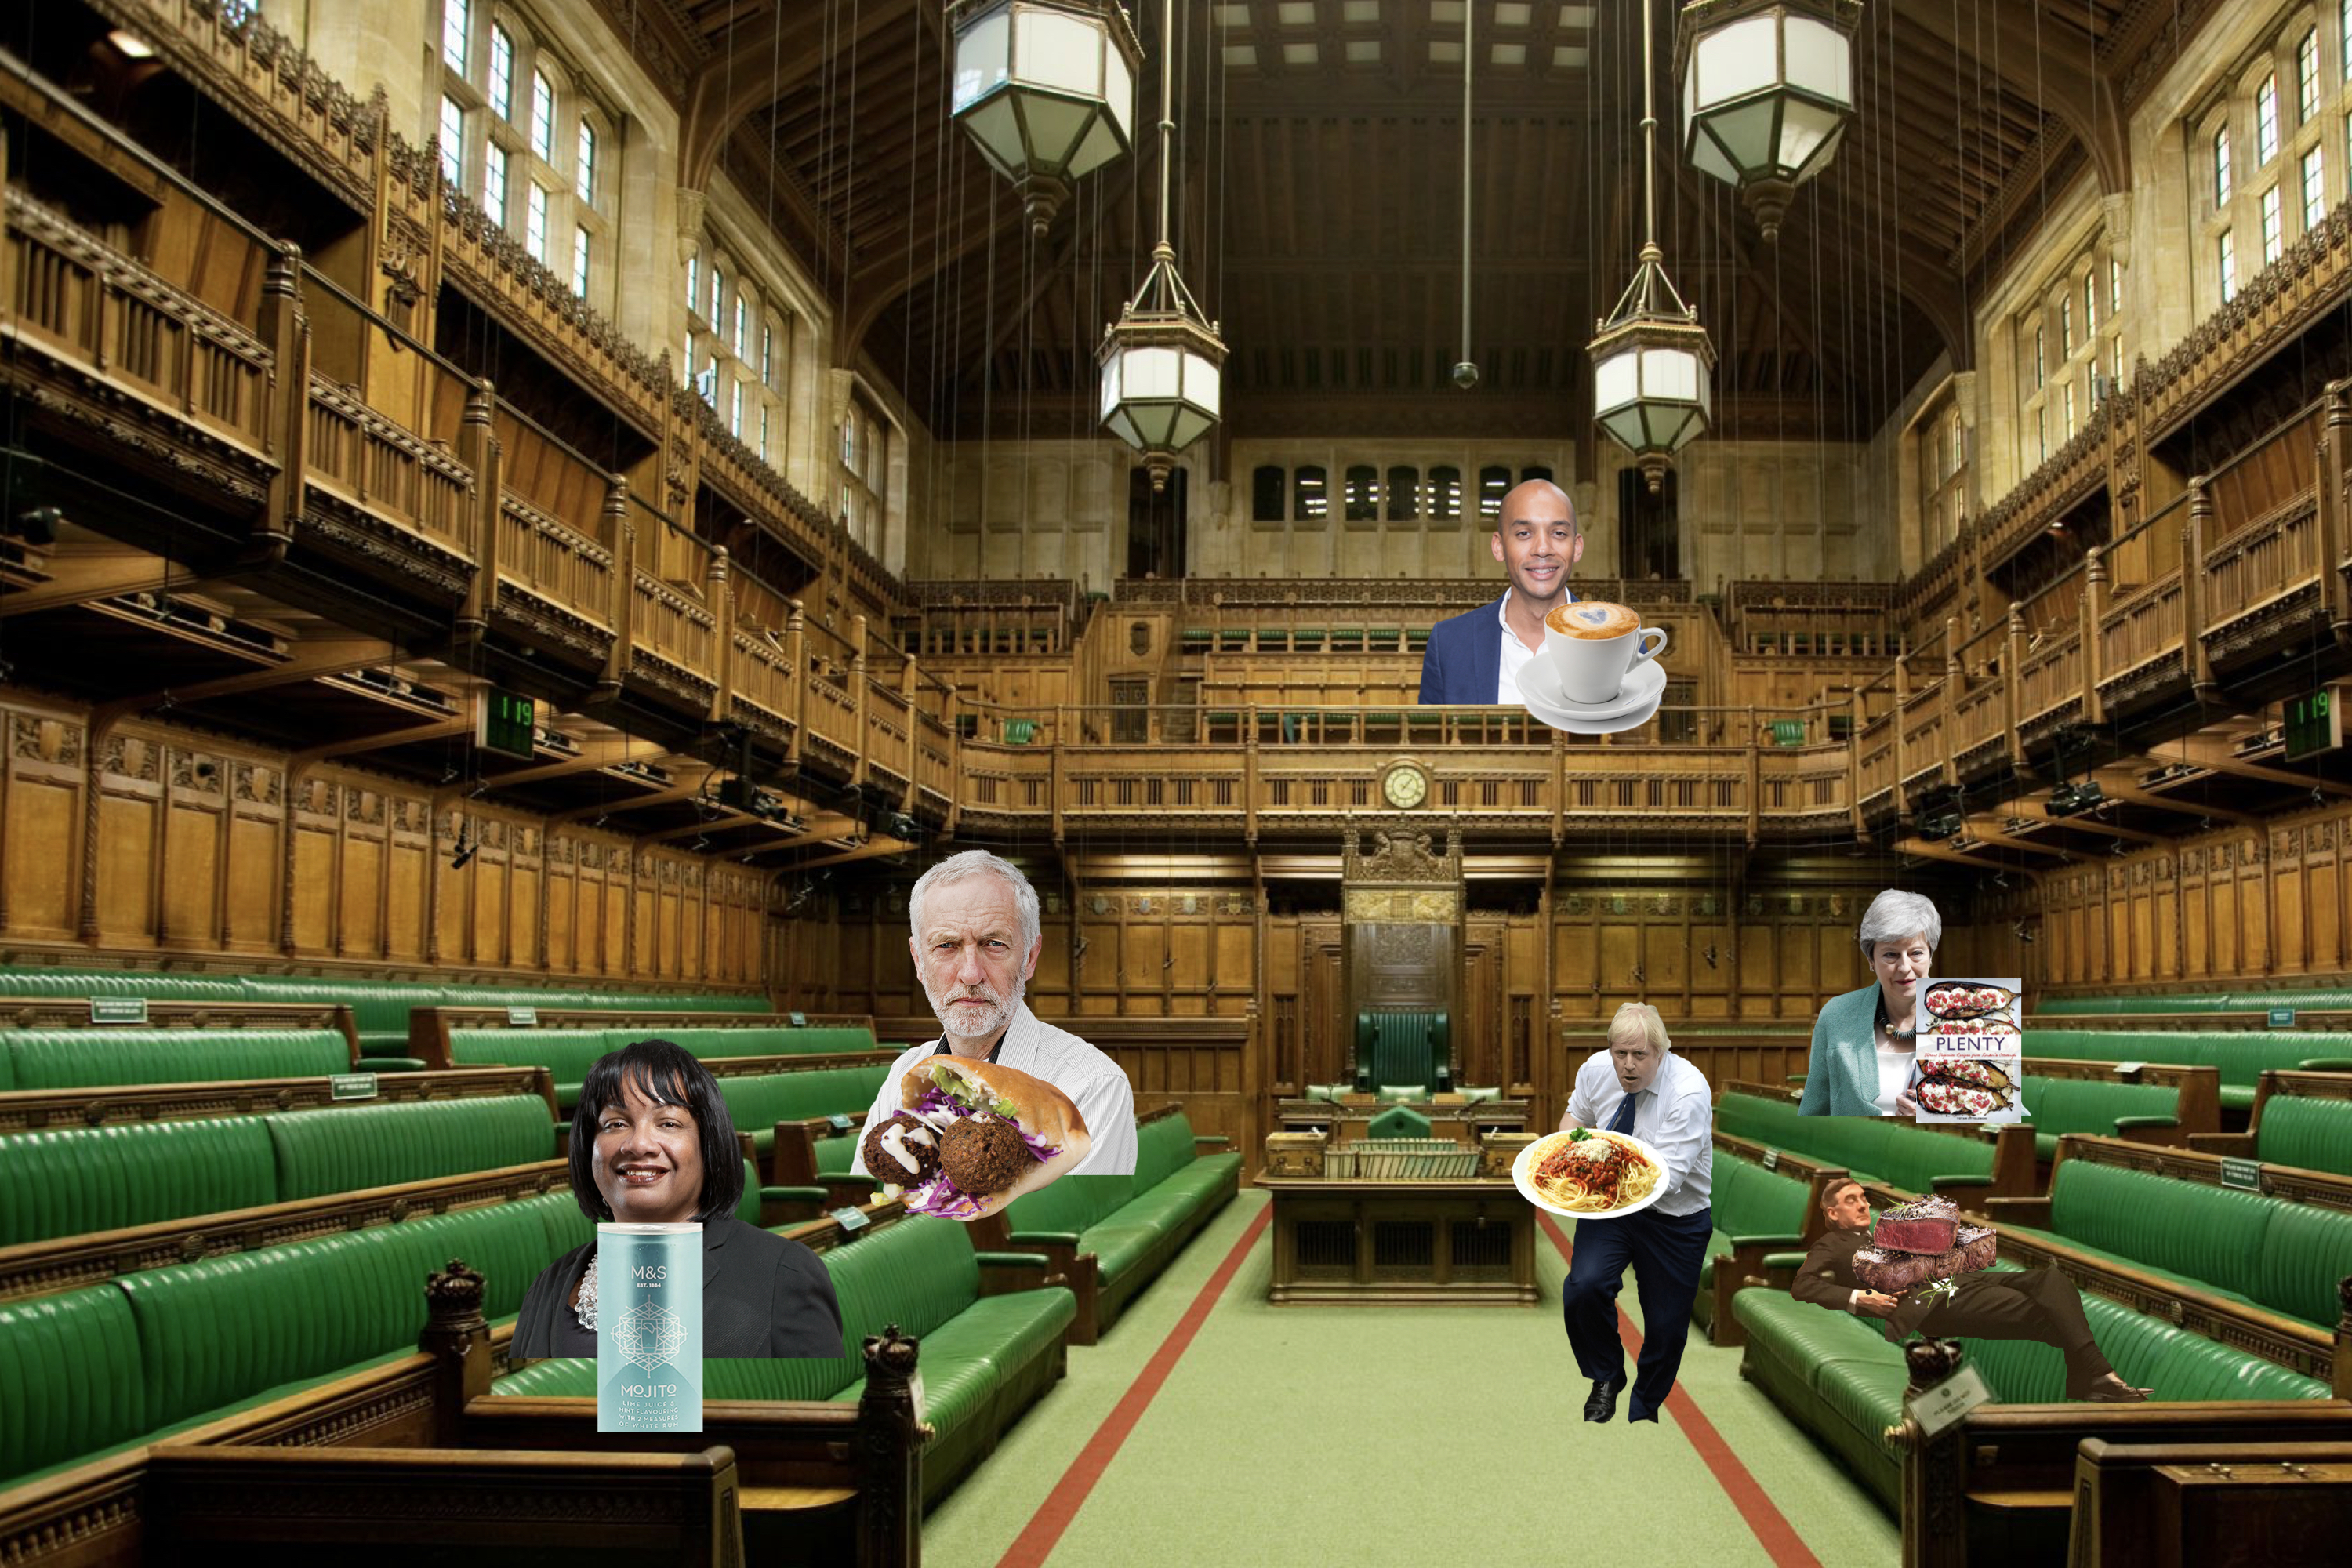 The House of Commons according to where politicians eat